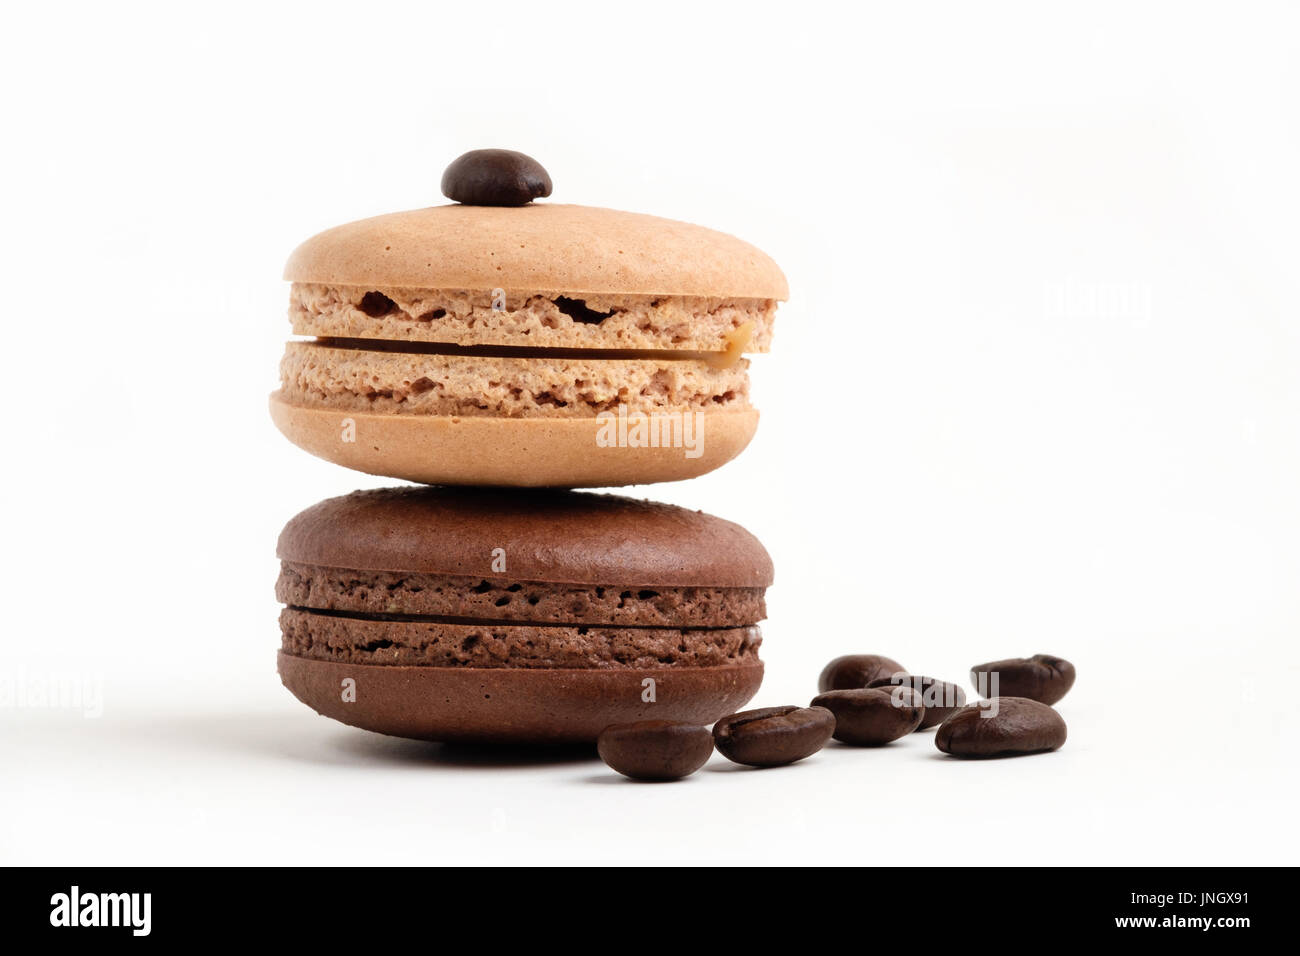 Coffee and mocha taste french macaroons Stock Photo